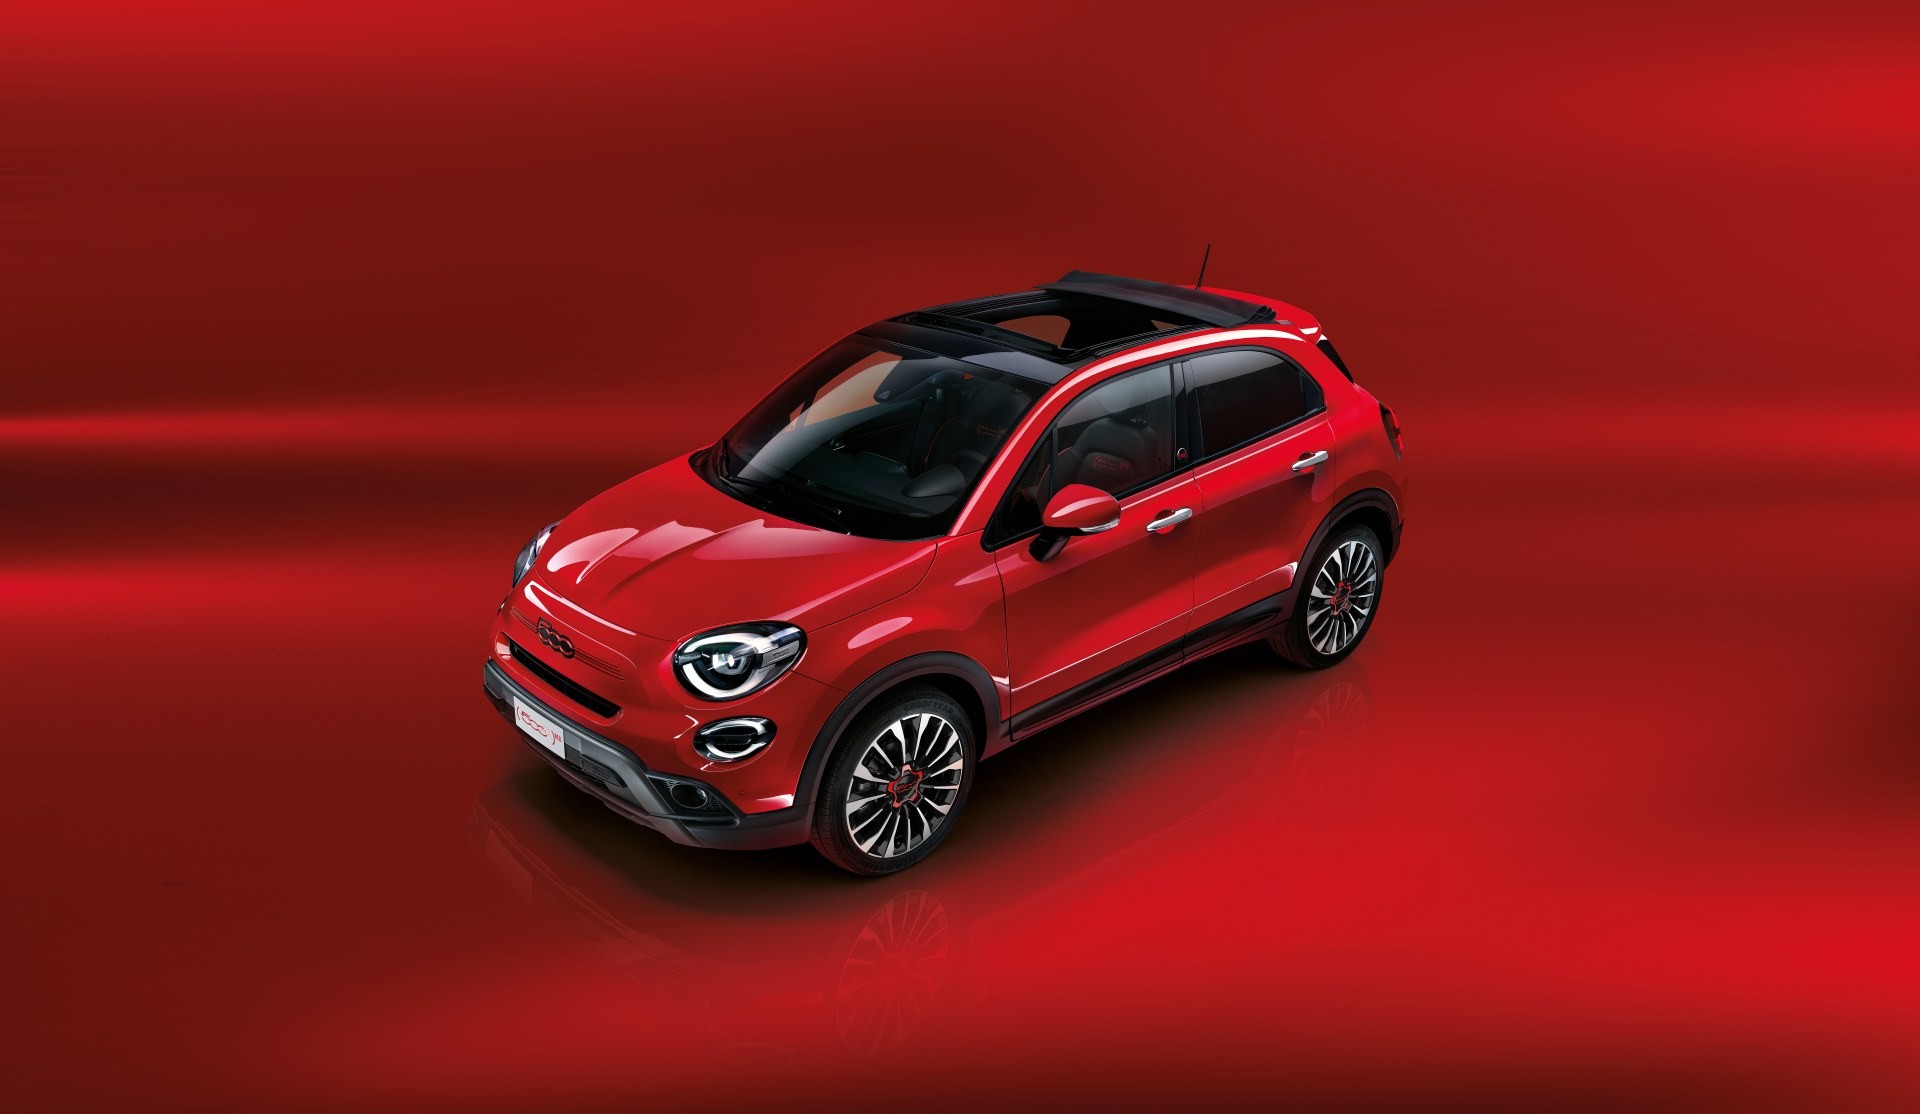 Fiat Completes Electrification of Its Line-Up With 500X Hybrid and